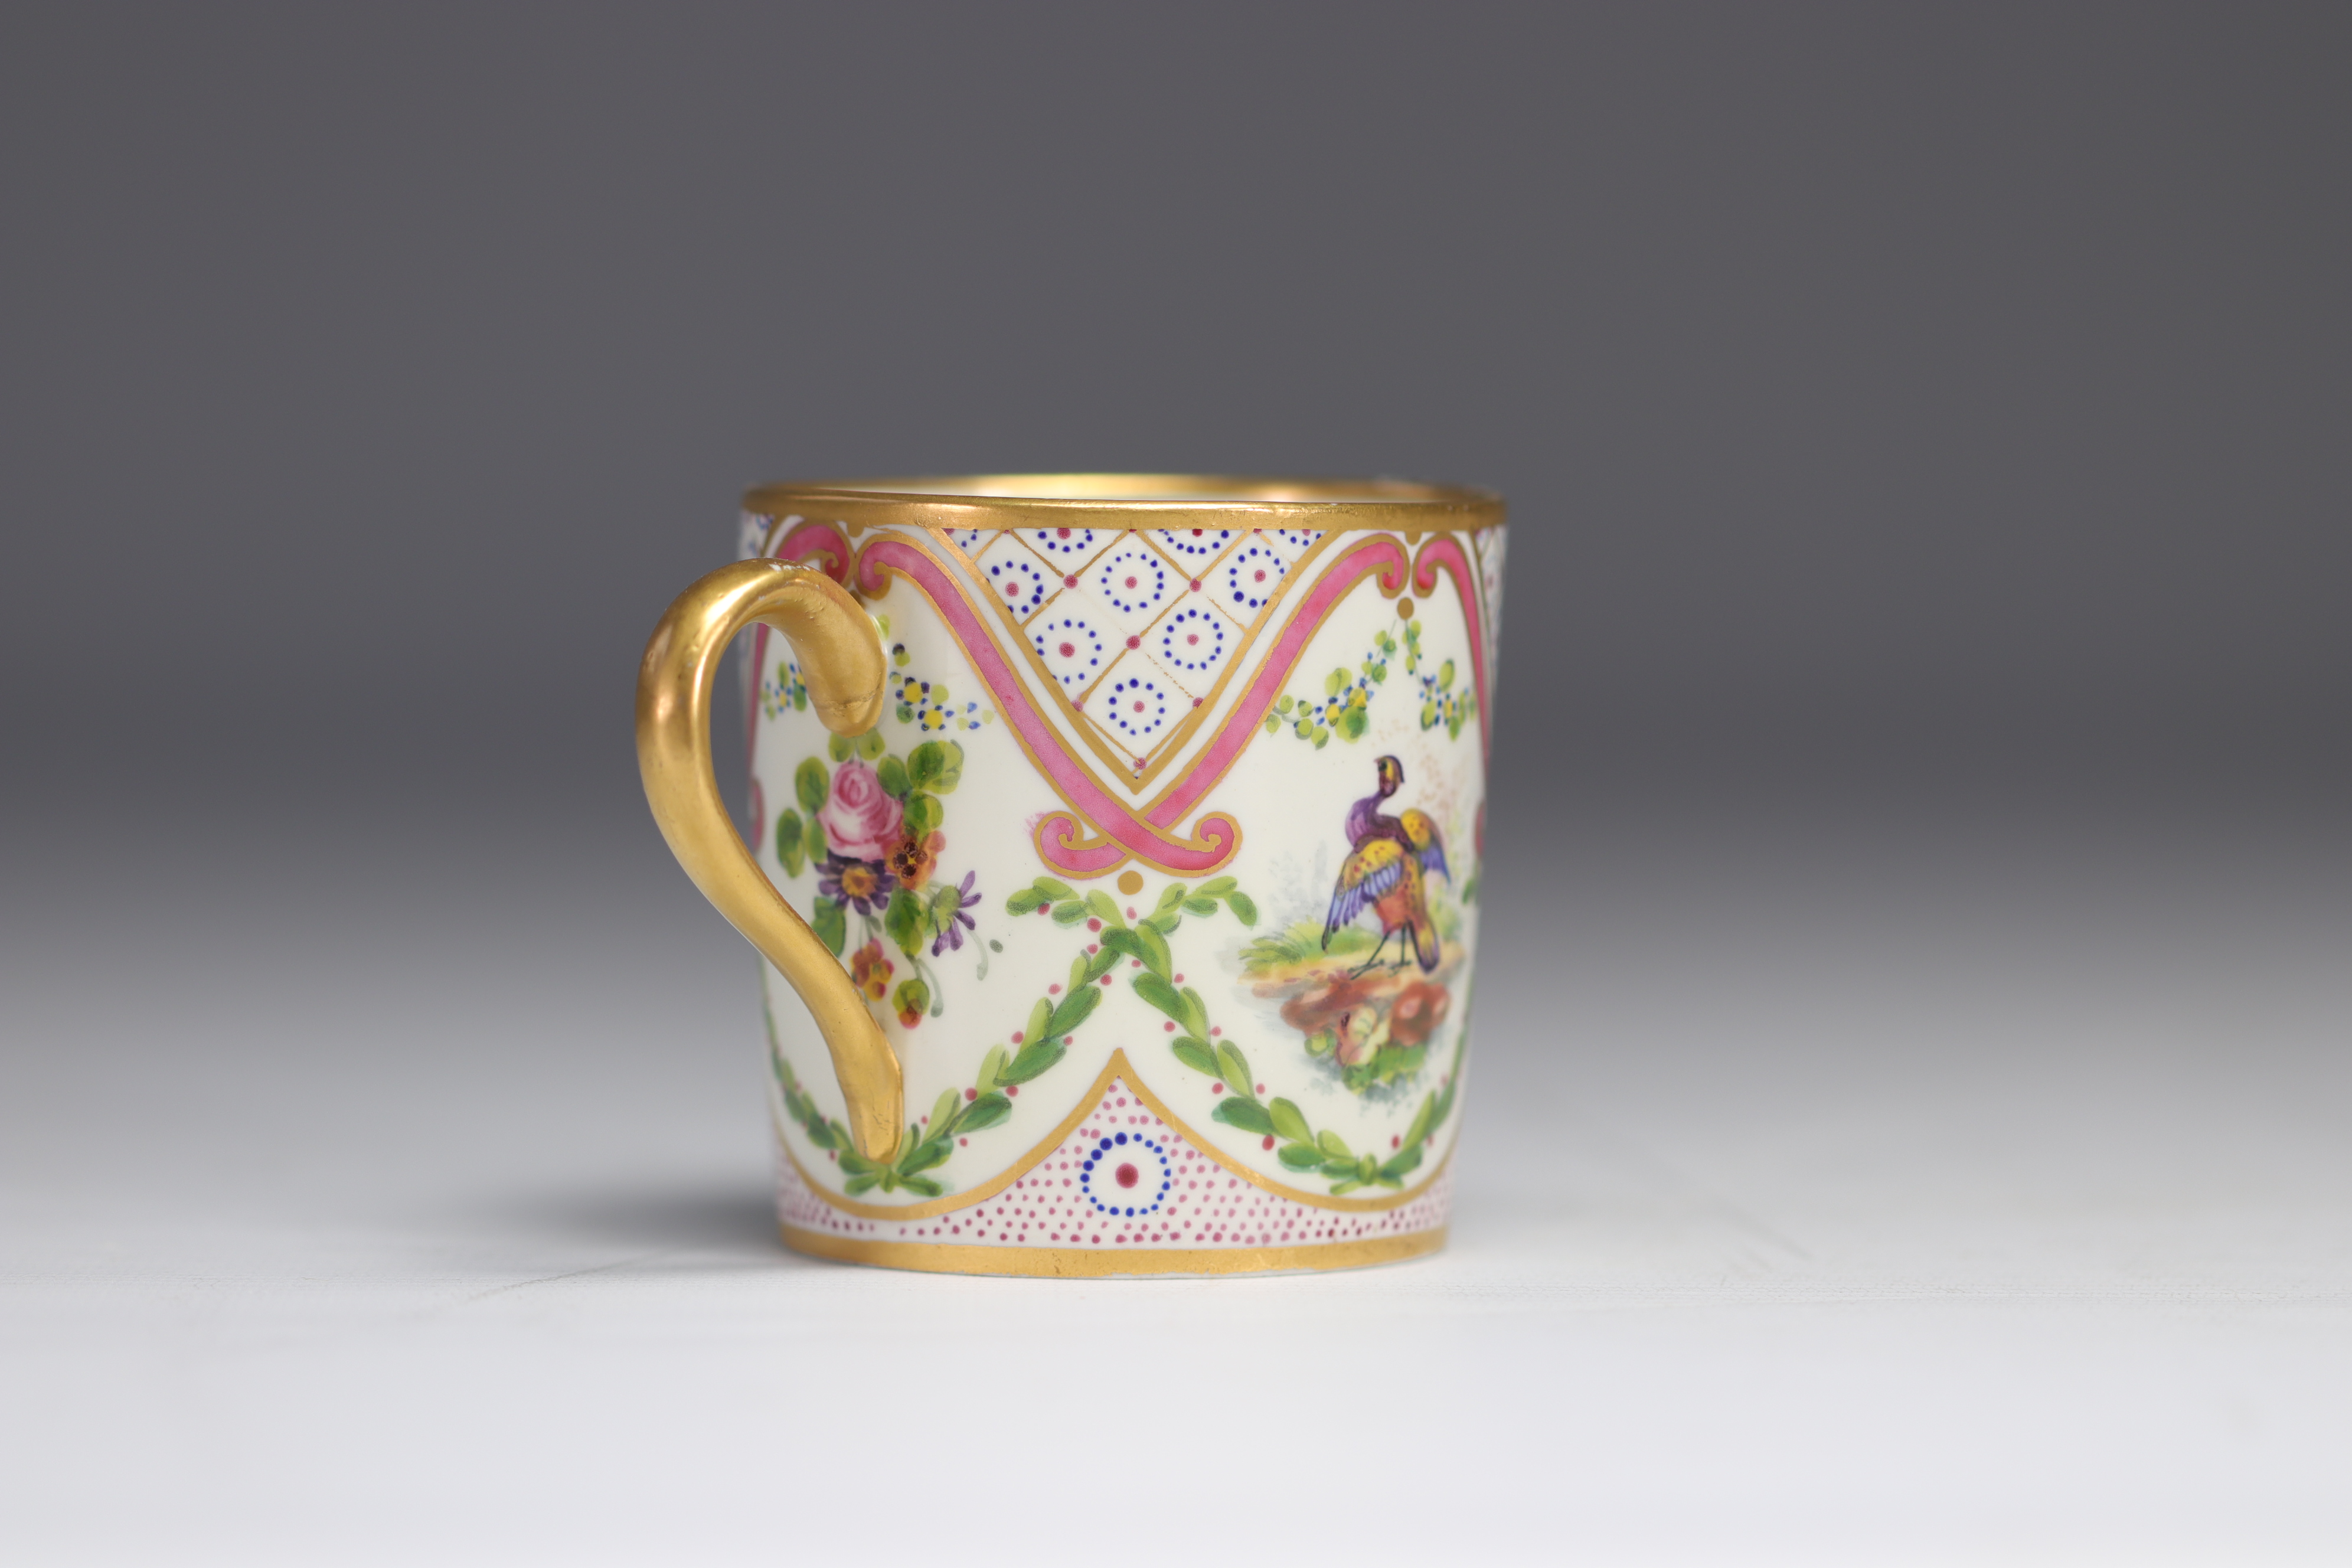 Porcelain "cup and saucer" decorated with birds and flowers from Tournai (Belgium) from 18th century - Image 5 of 7